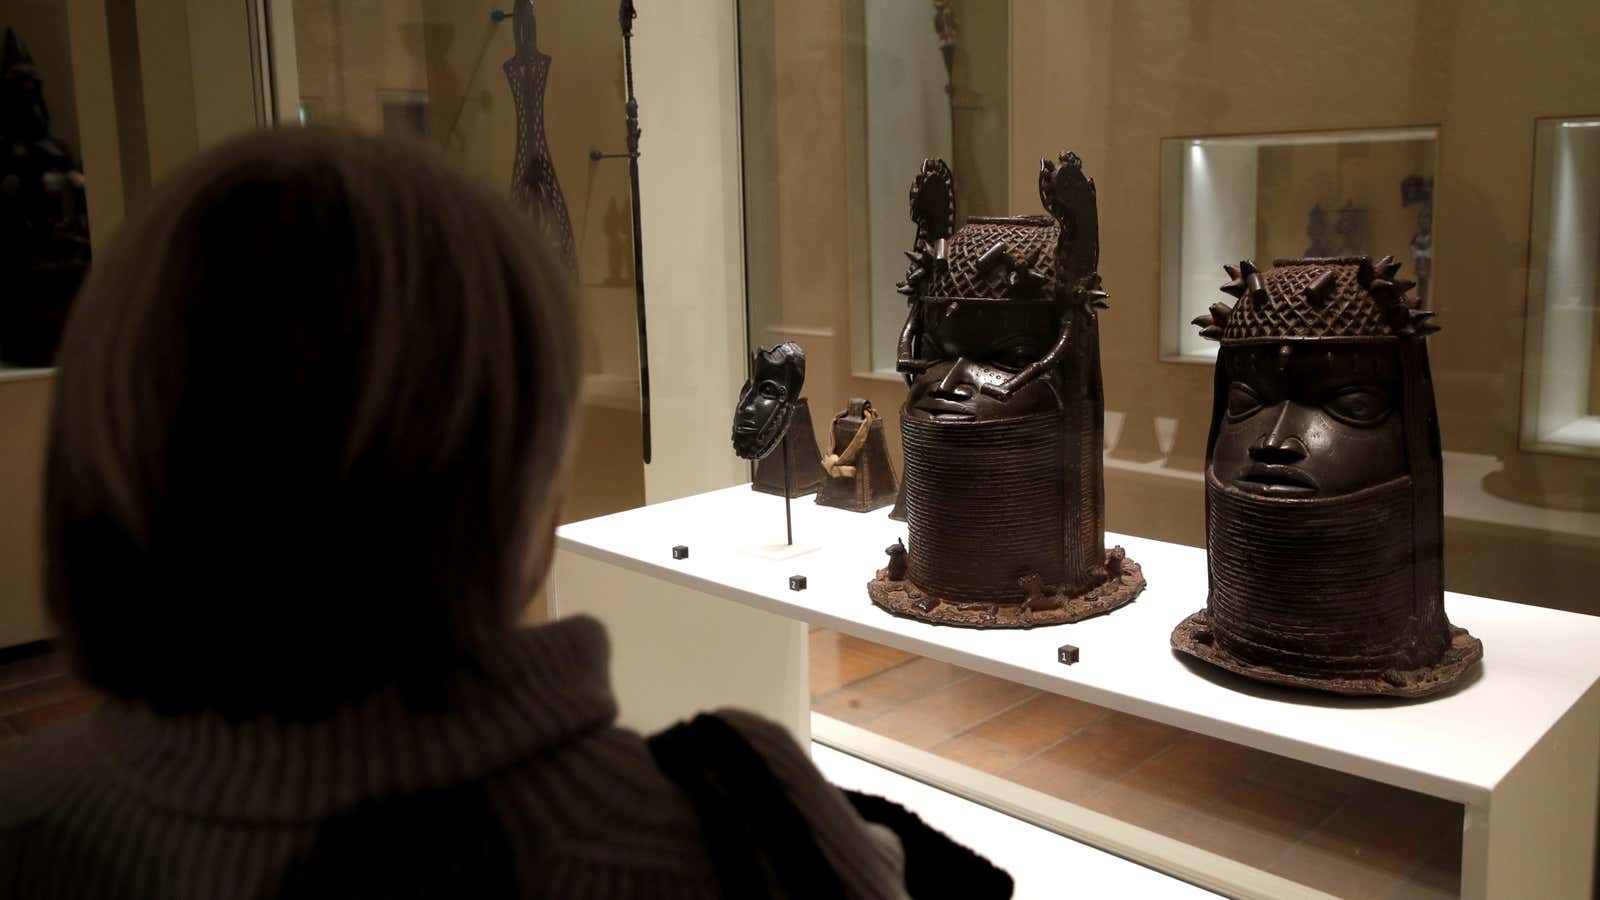 A visitor looks at two Heads of a royal ancestor (Uhunmwun Elao), from the former Benin Kingdom, a part of modern-day Nigeria displayed at the Quai Branly Museum in Paris.